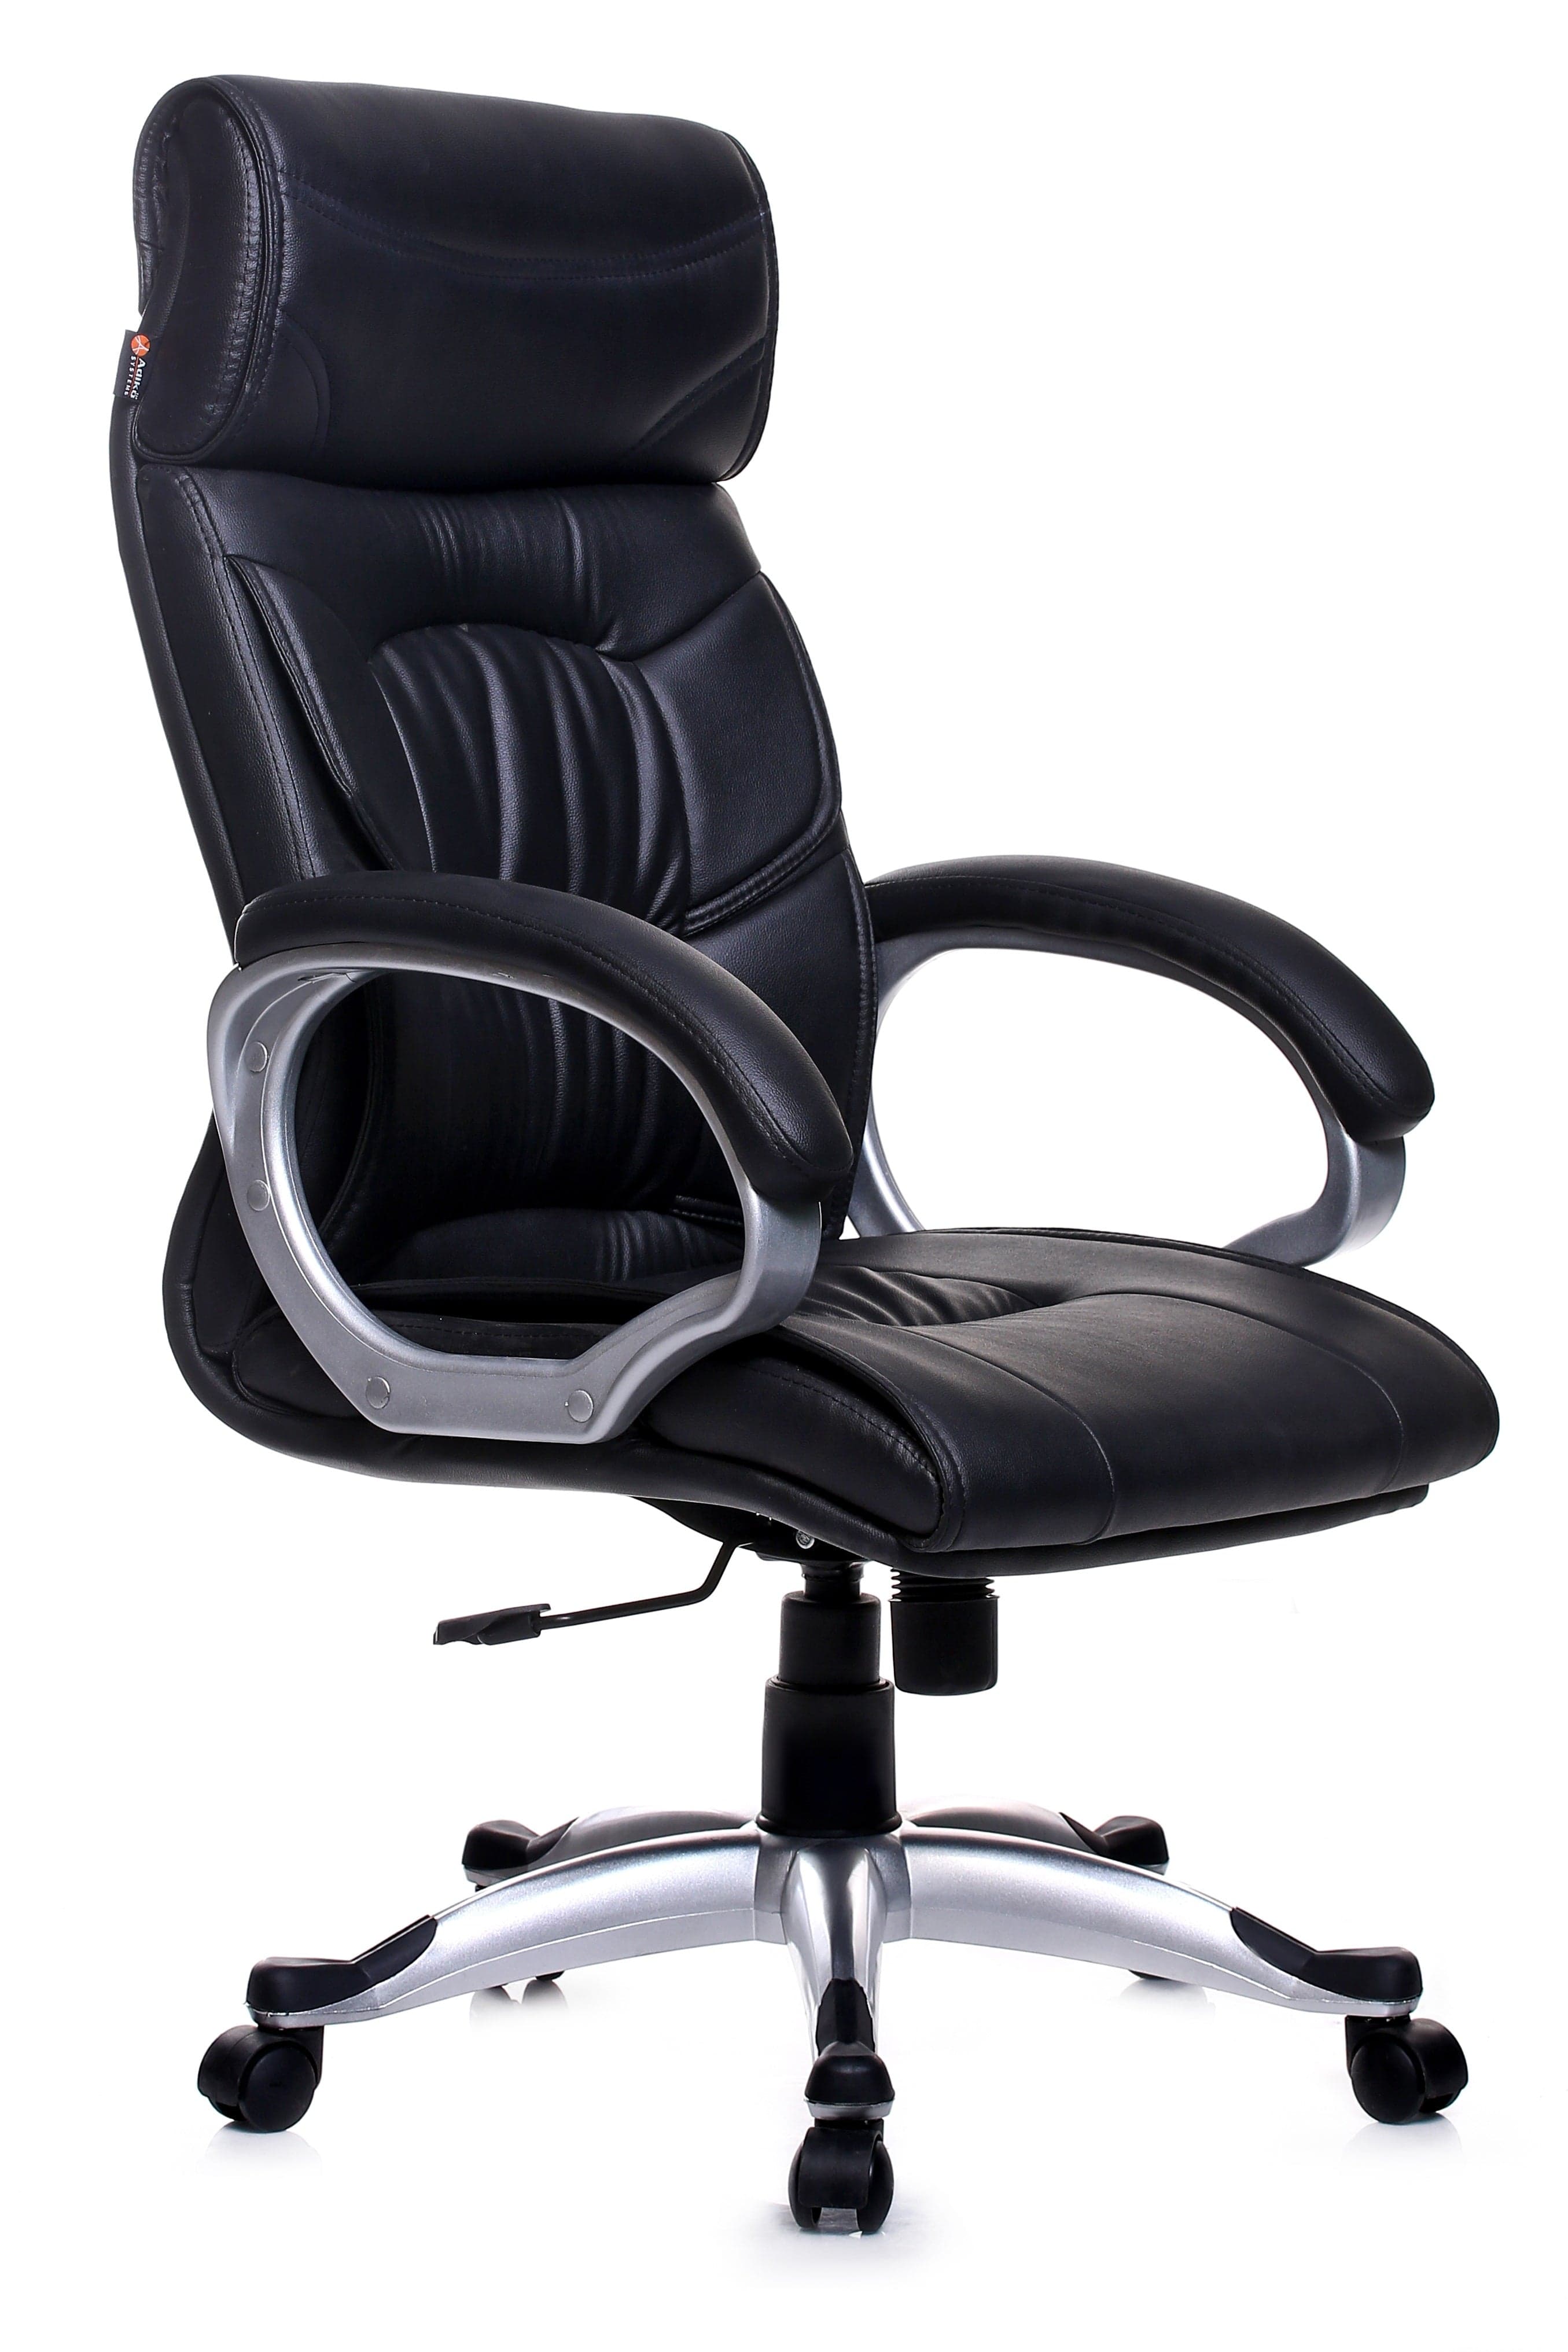 Stylish Executive Chair in Black Colour by Adiko Systems